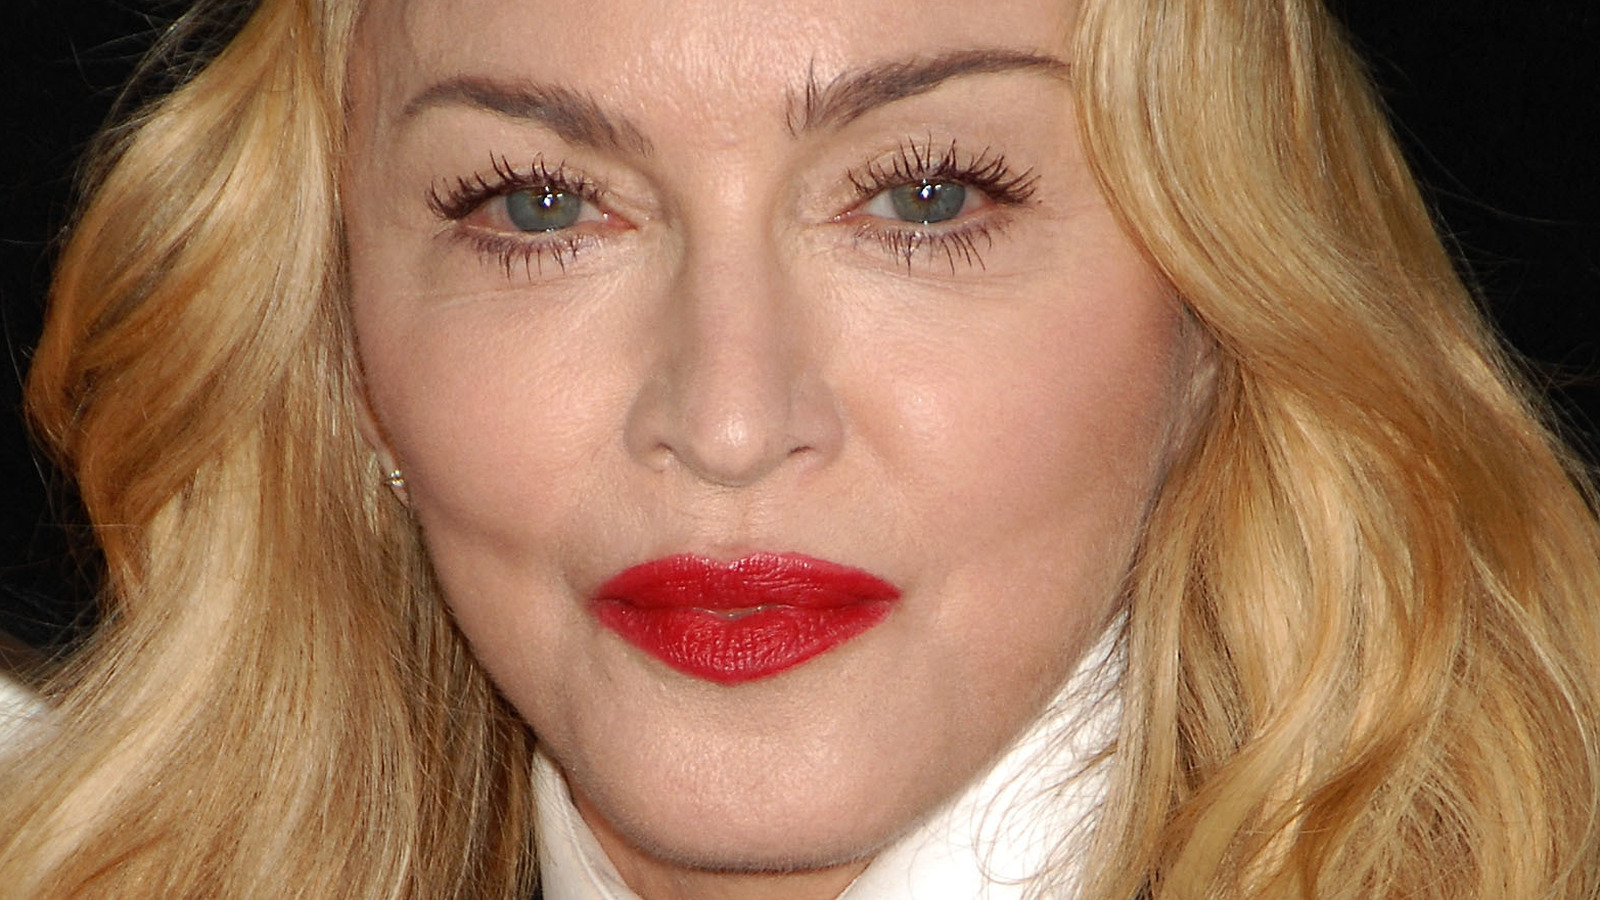 A Complete Timeline Of Madonna's Many Feuds